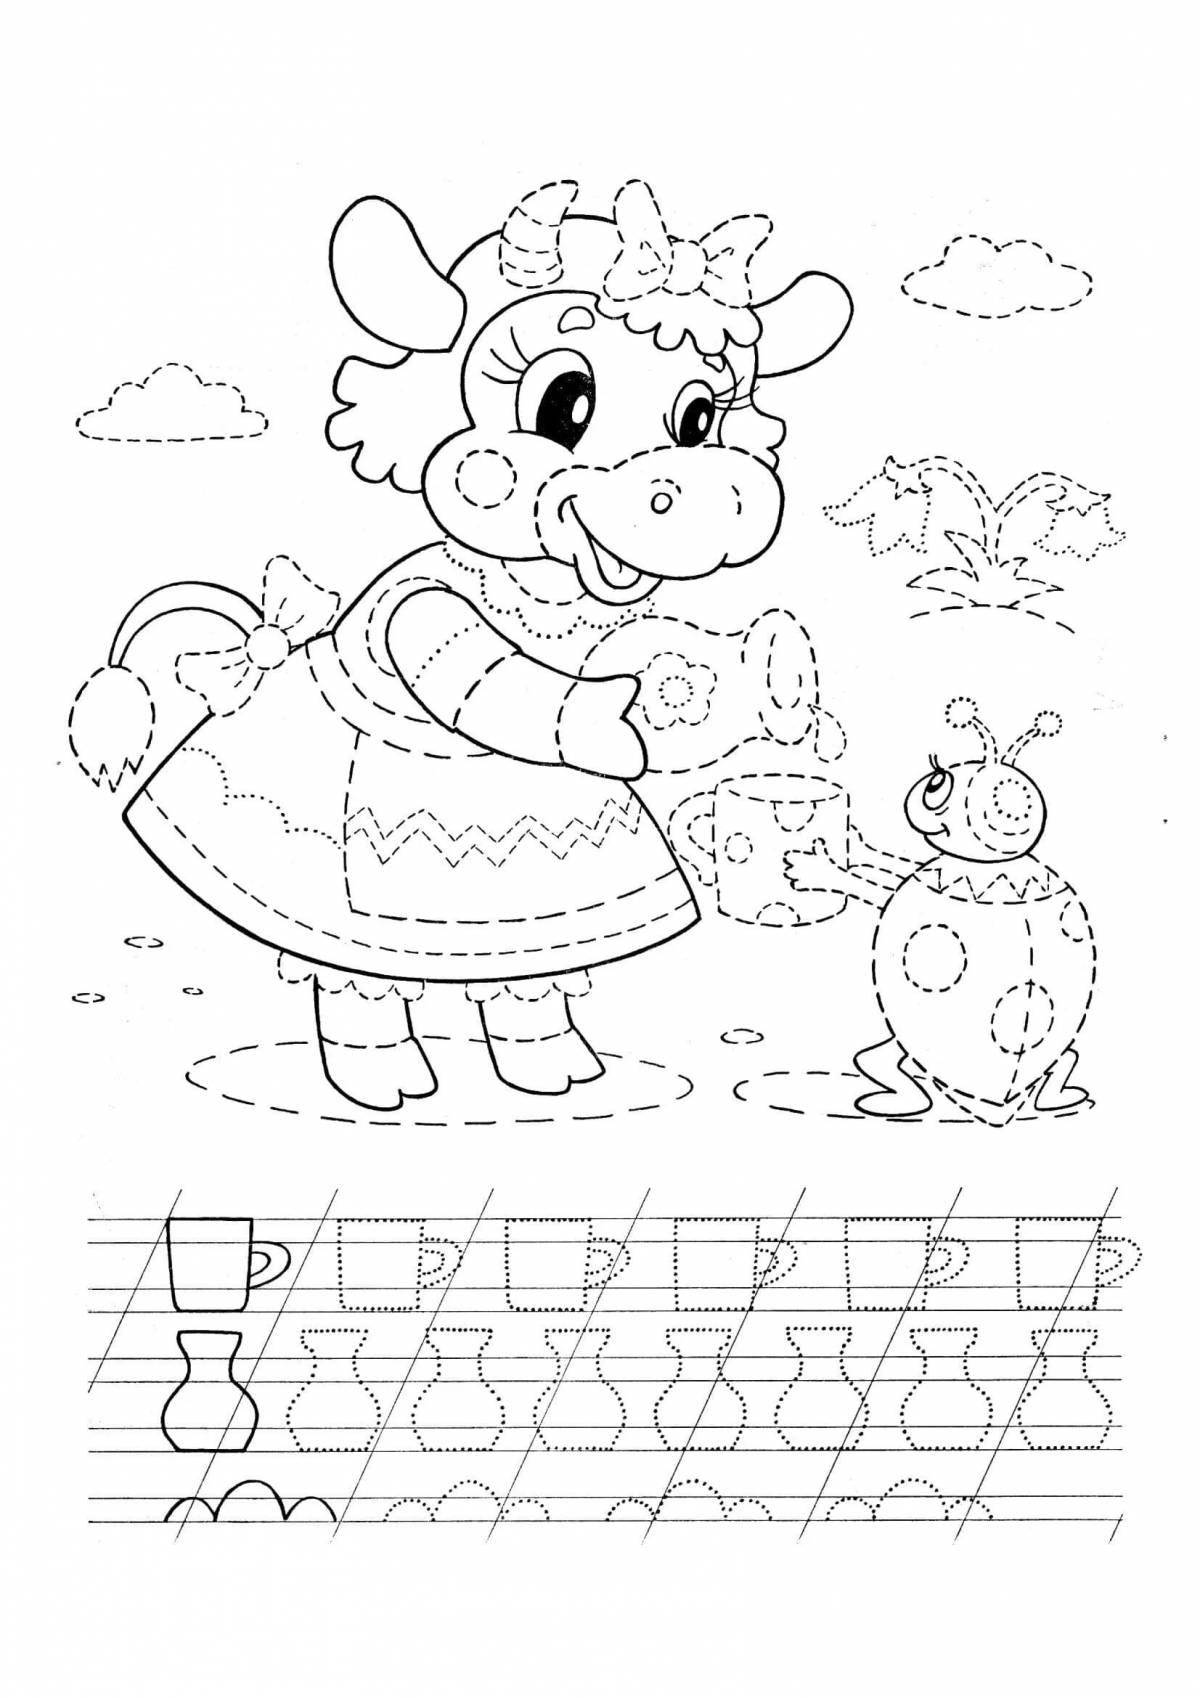 Joyful coloring for children 5-6 years old